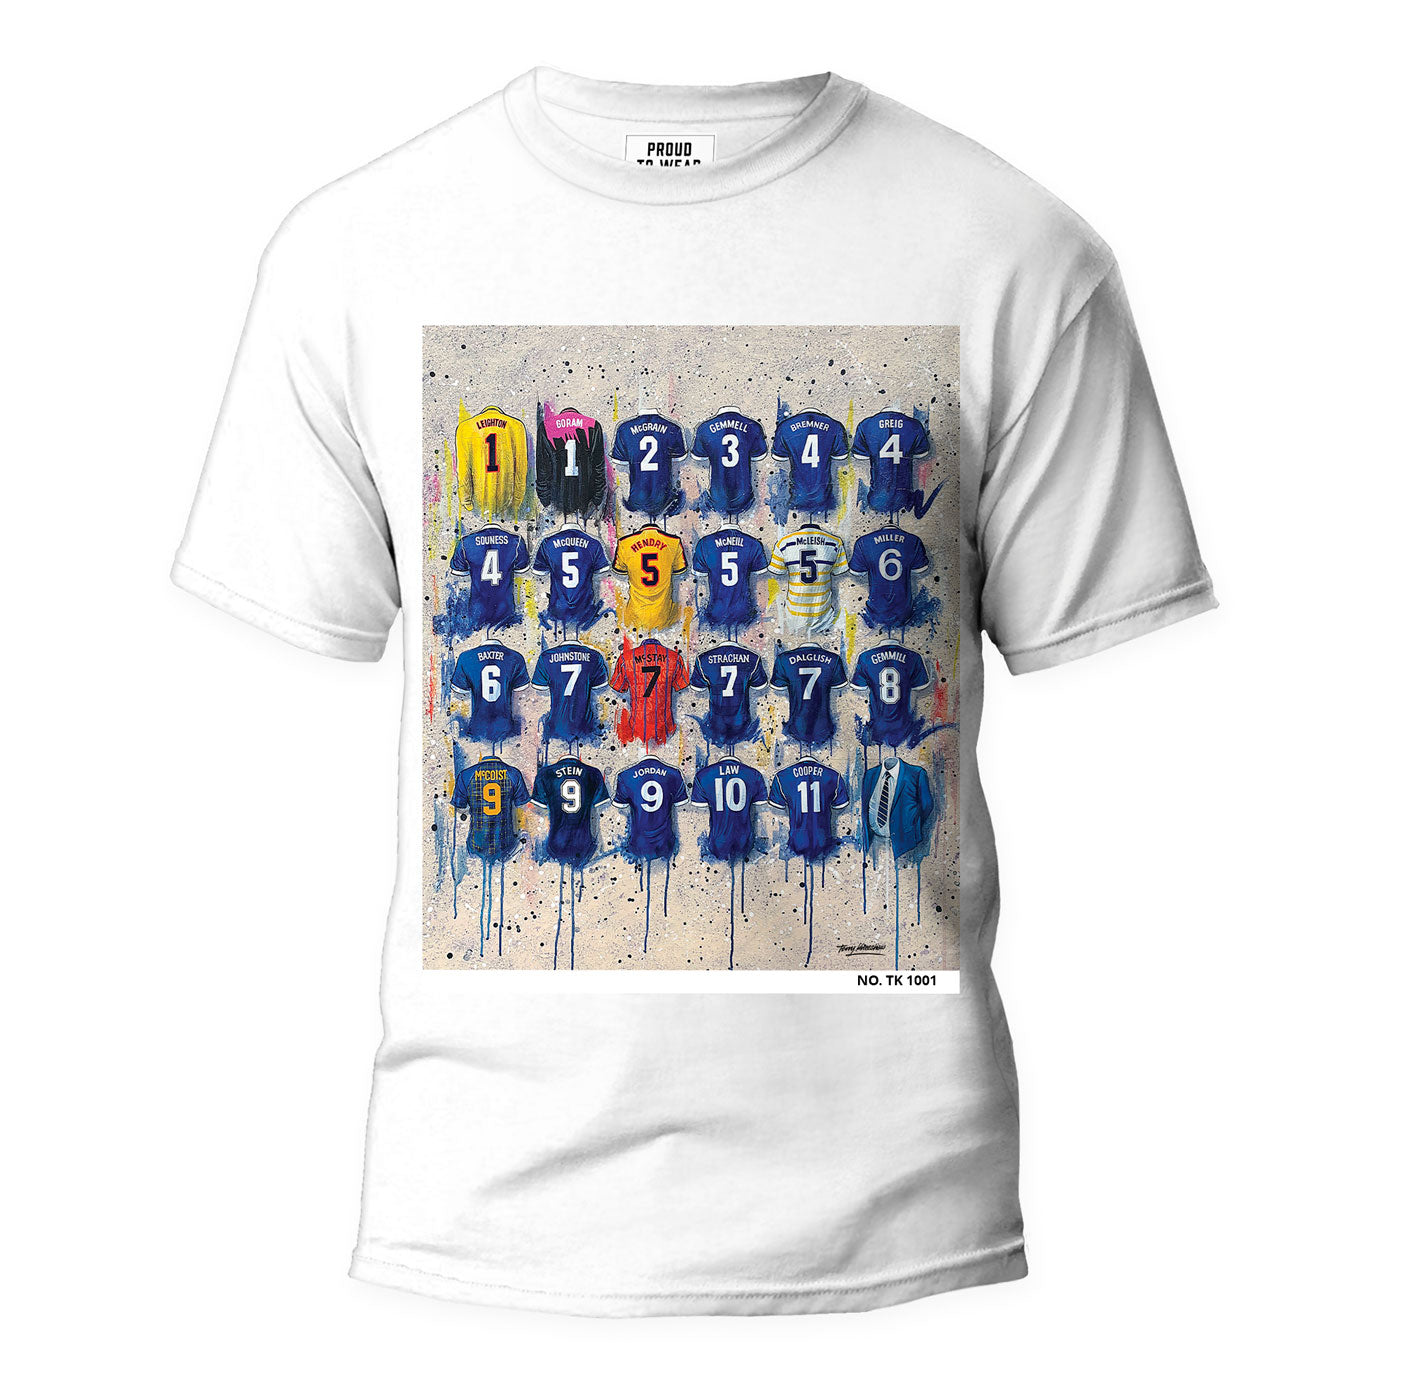 These Scotland pre-2000 national team T-shirts feature unique artwork by Terry Kneeshaw and are individually numbered. Available in black or white and in sizes xxs to xxxl, these one-off T-shirts are perfect for fans of the classic Scottish national team. Show your support for Scotland with these stylish and high-quality T-shirts featuring Kneeshaw's original artwork.